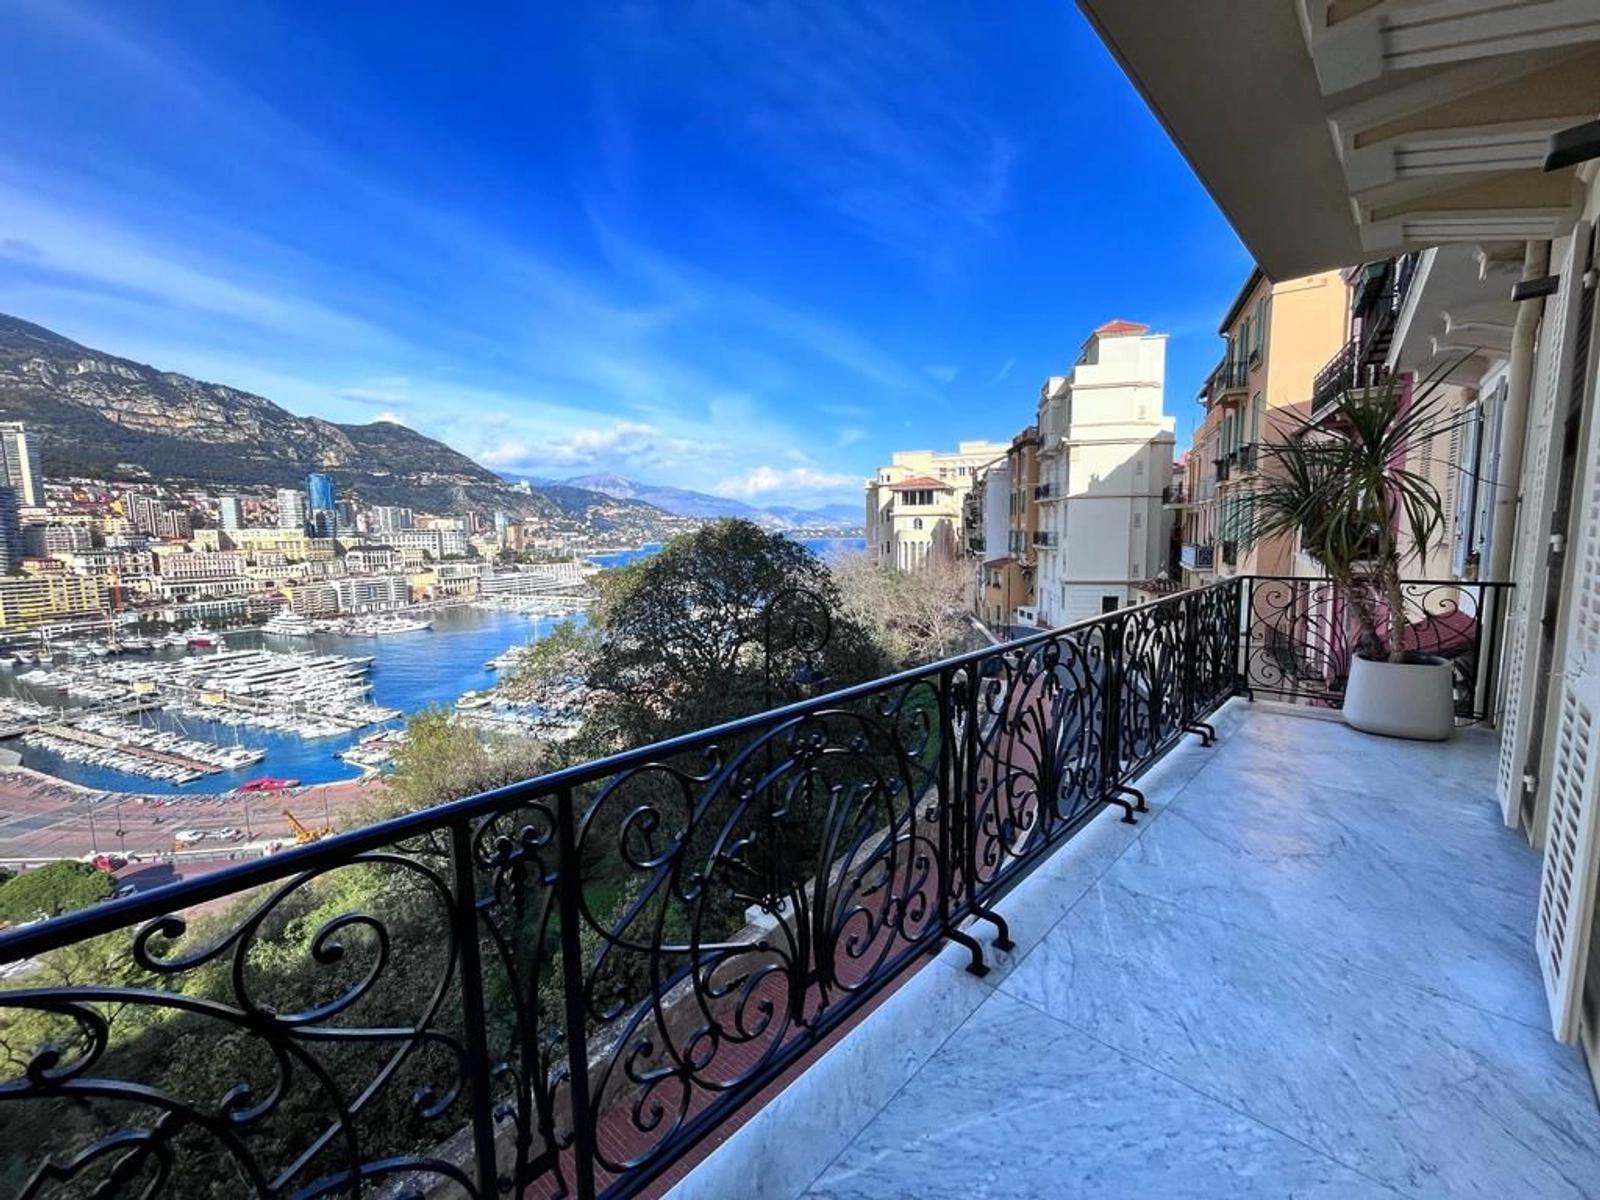 Space Sumptuous villa in Monaco with panoramic view - 4